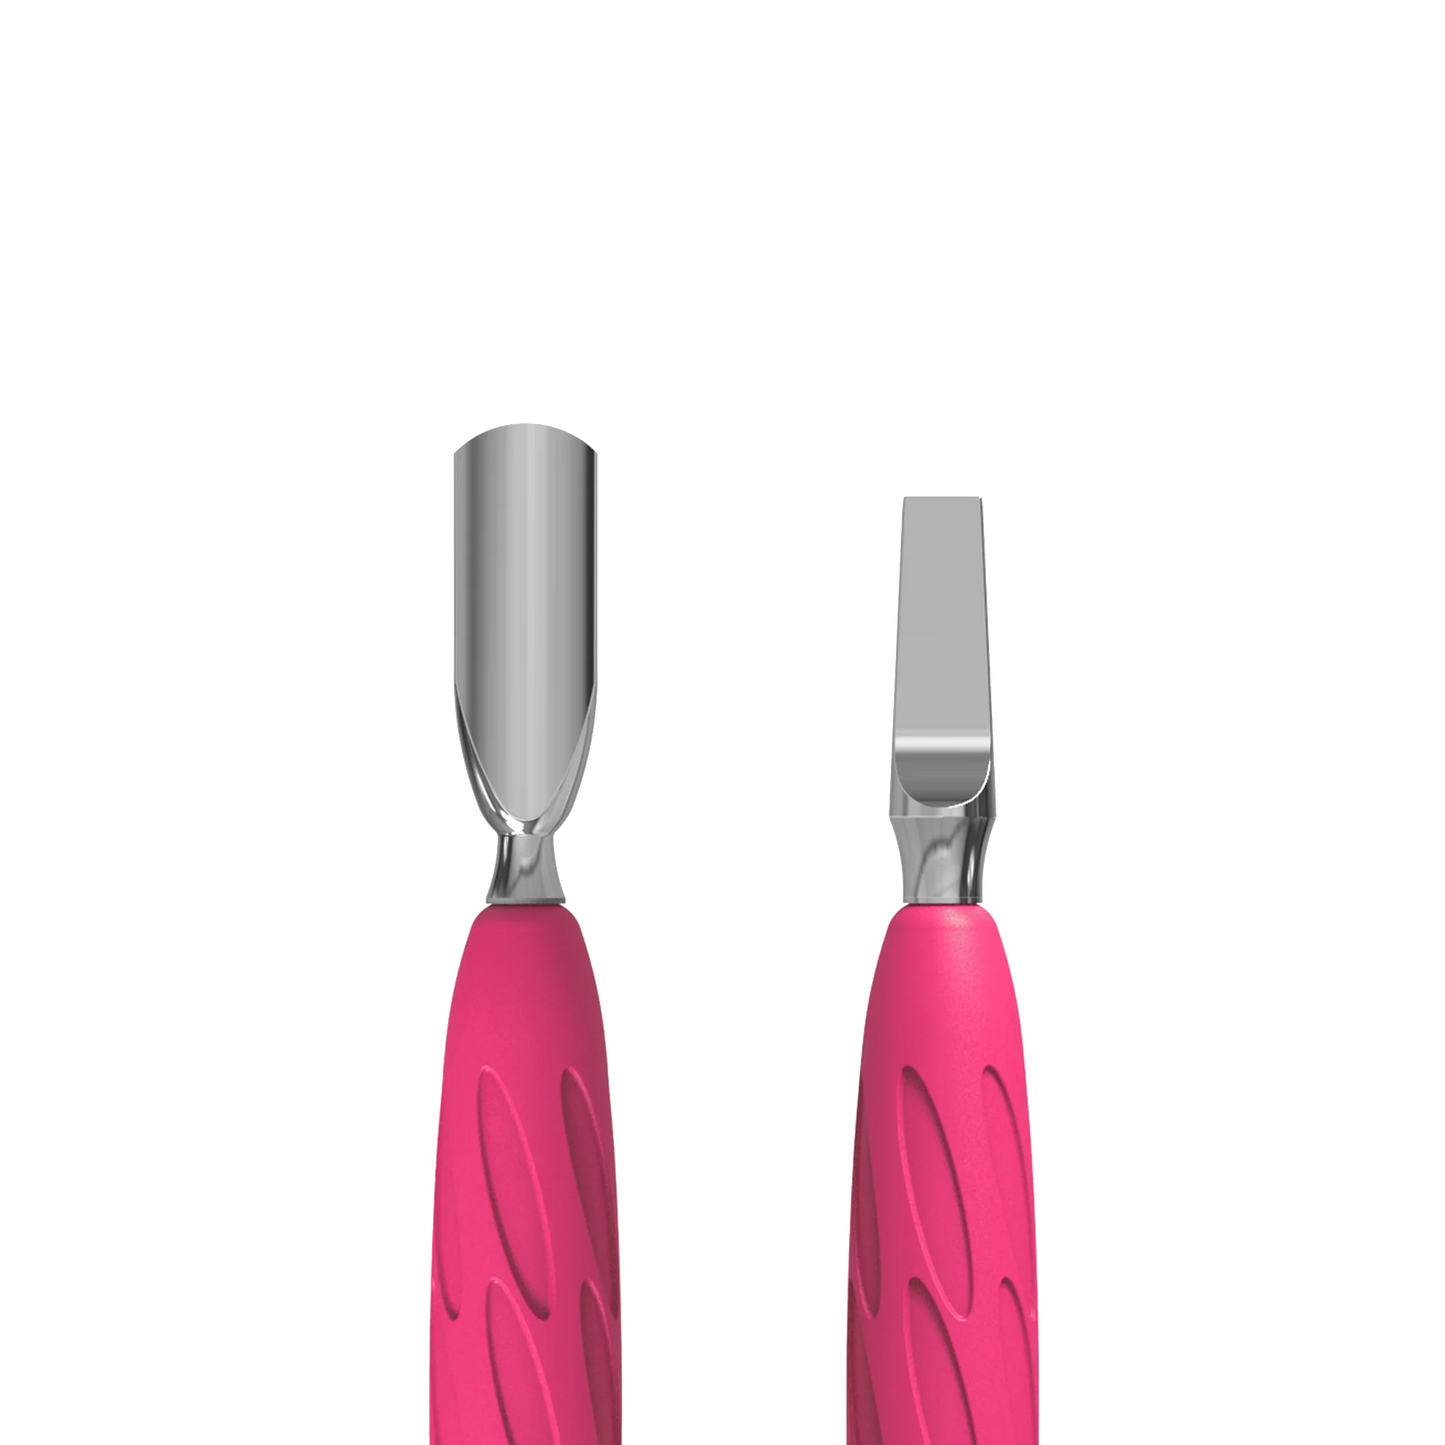 Manicure Pusher With Silicone Handle "Gummy" UNIQ 10 TYPE 5 (Narrow Rounded Pusher + Wide Blade) PQ-10/5